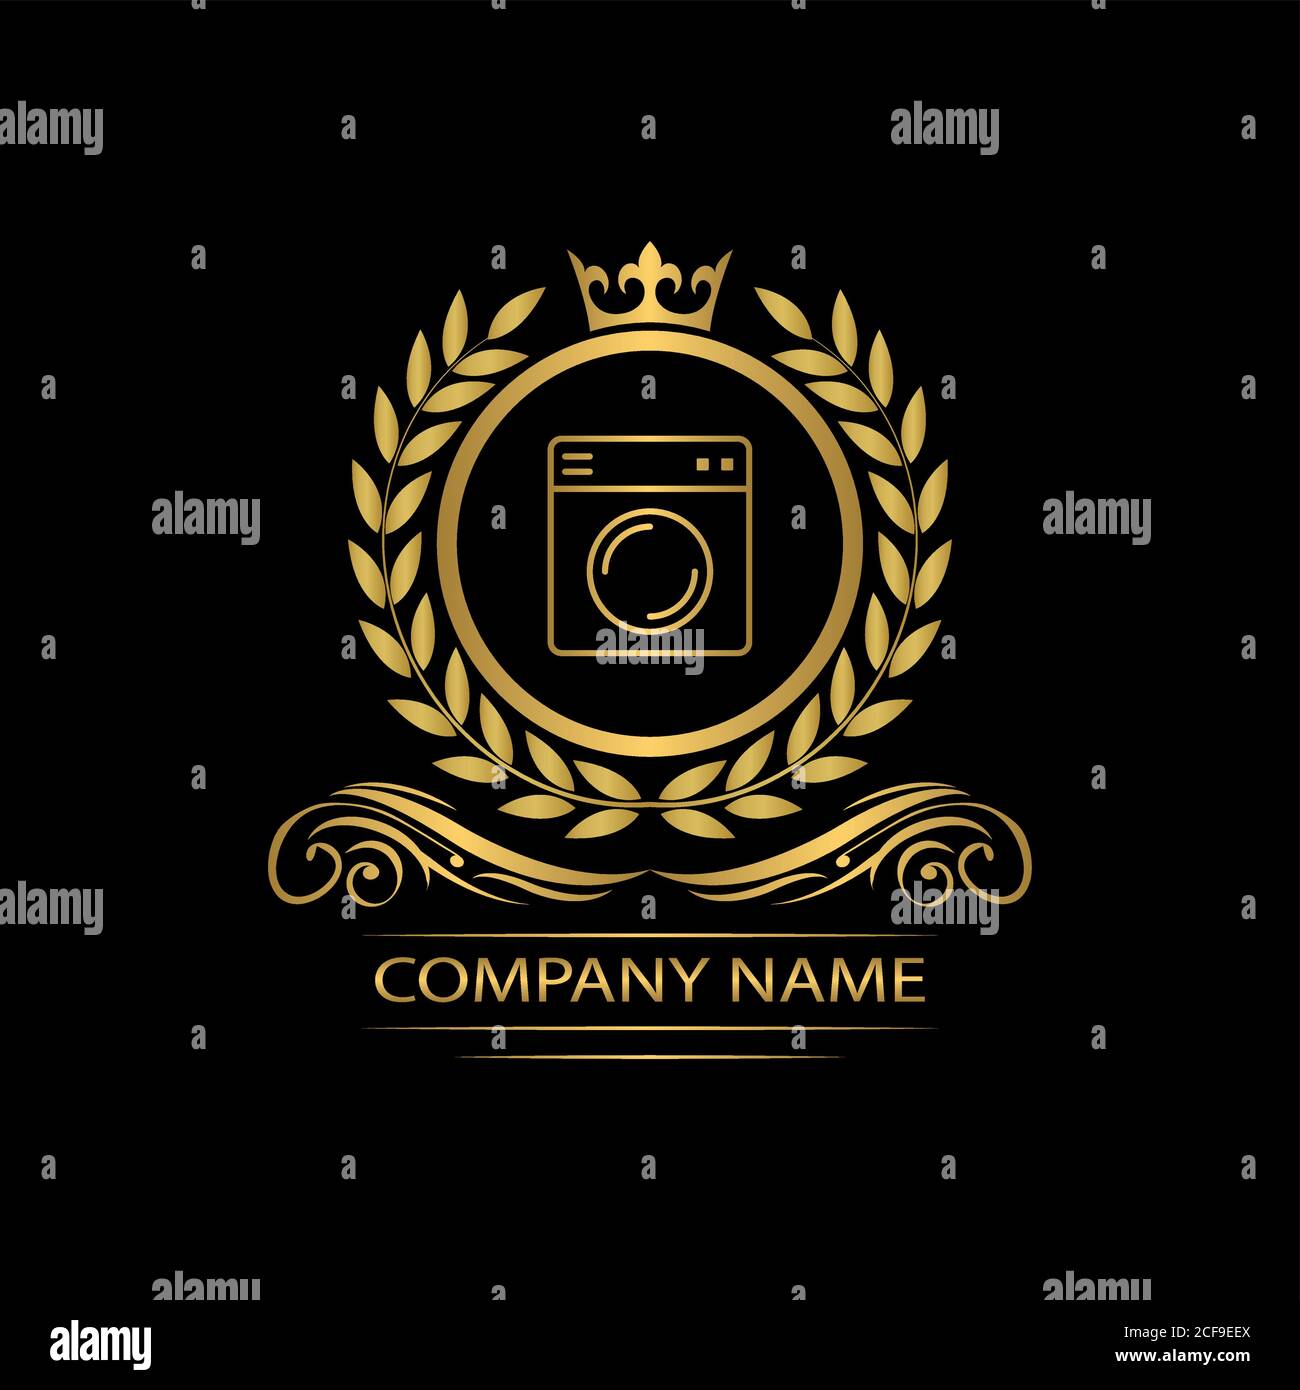 washing machine logo template luxury royal vector company decorative emblem with crown Stock Vector